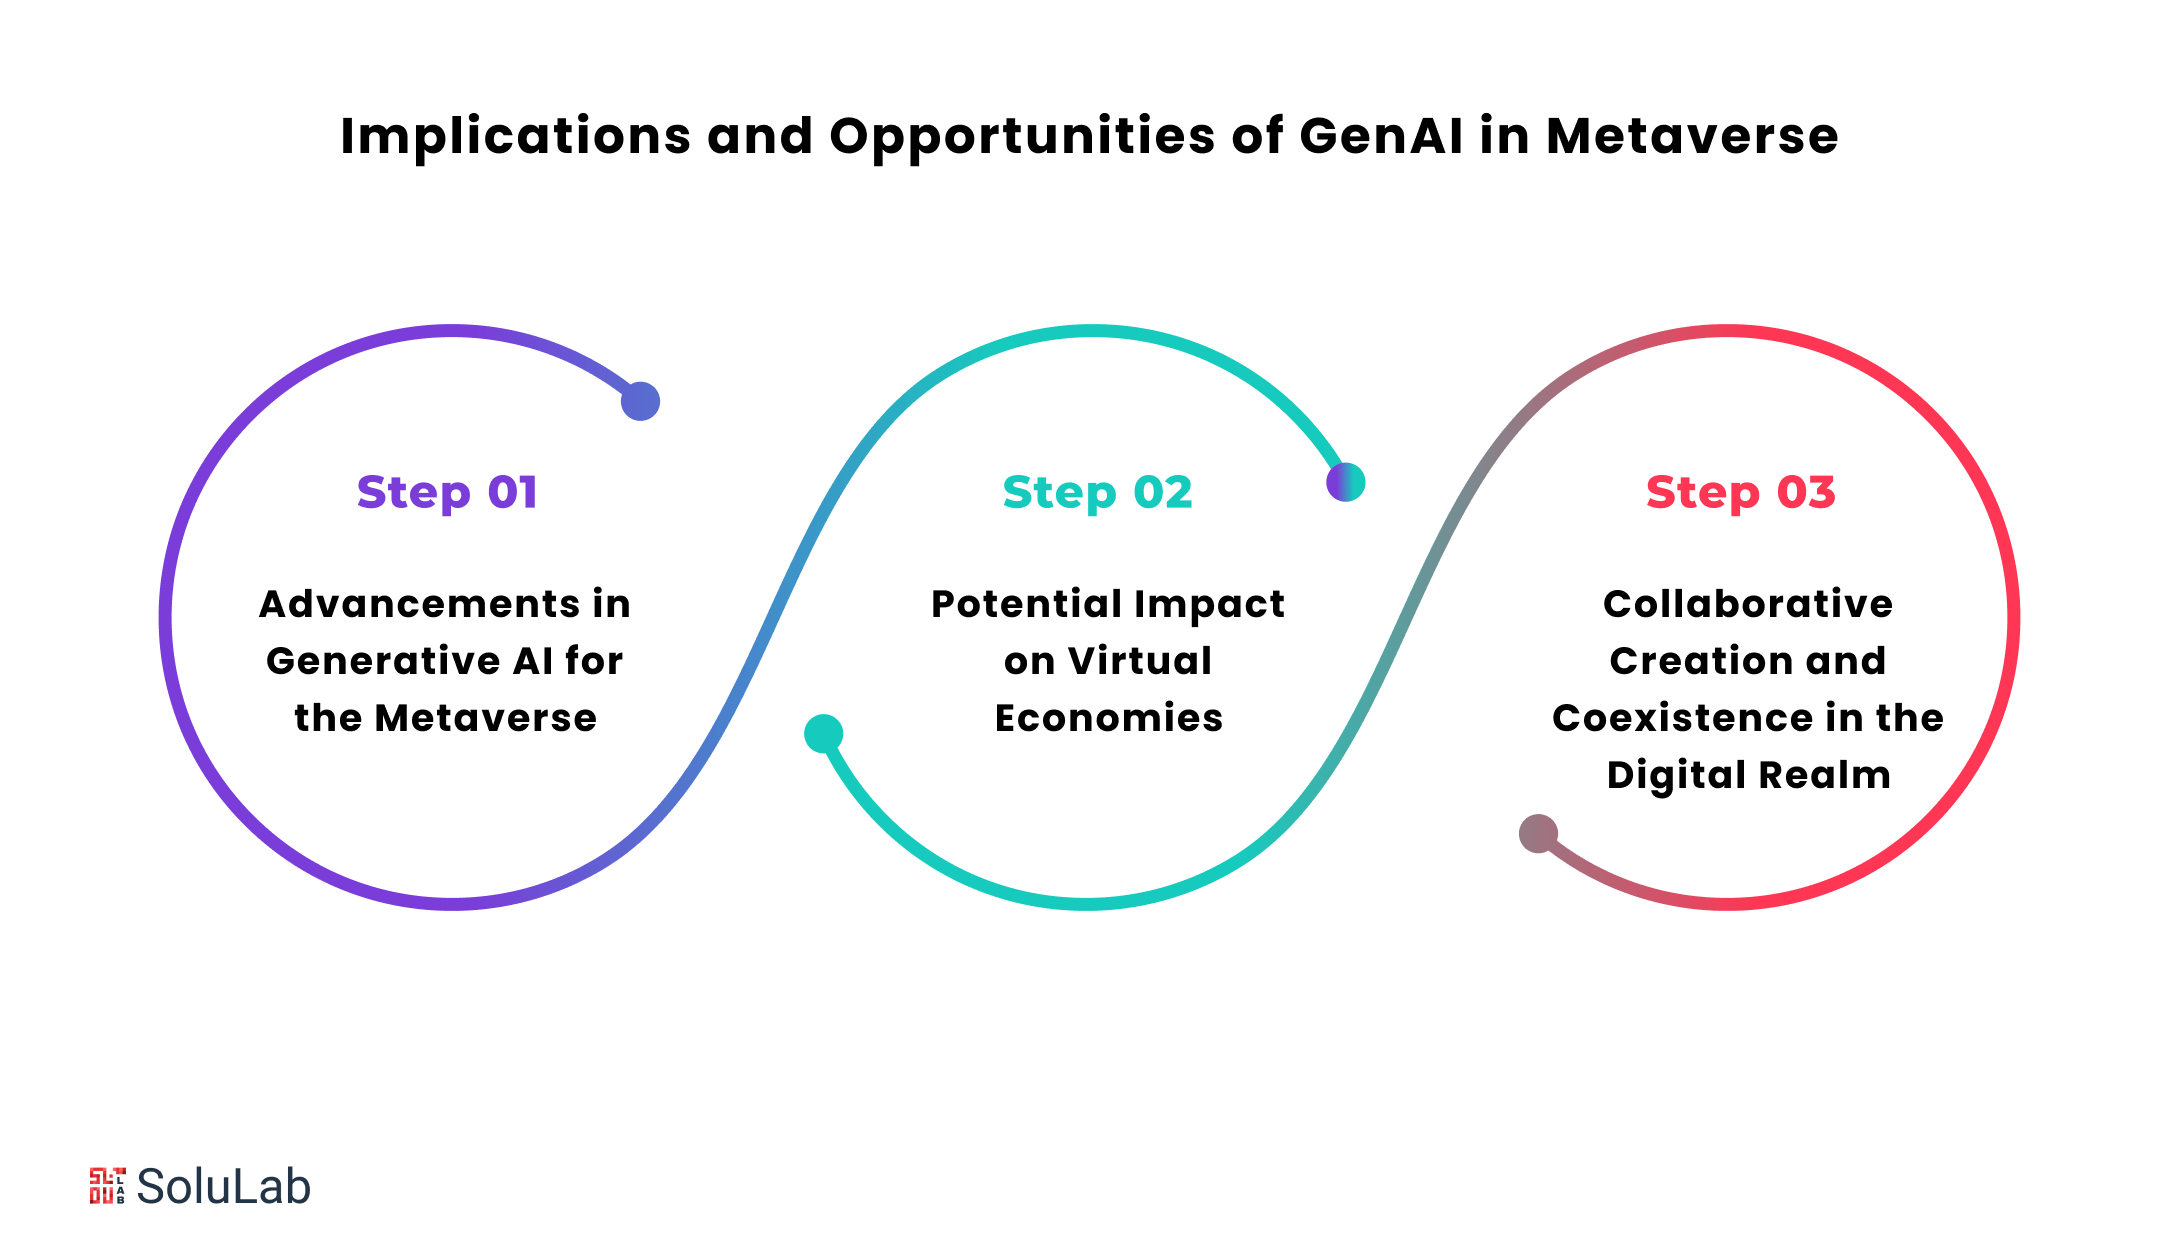 Implications and Opportunities of GenAI in Metaverse